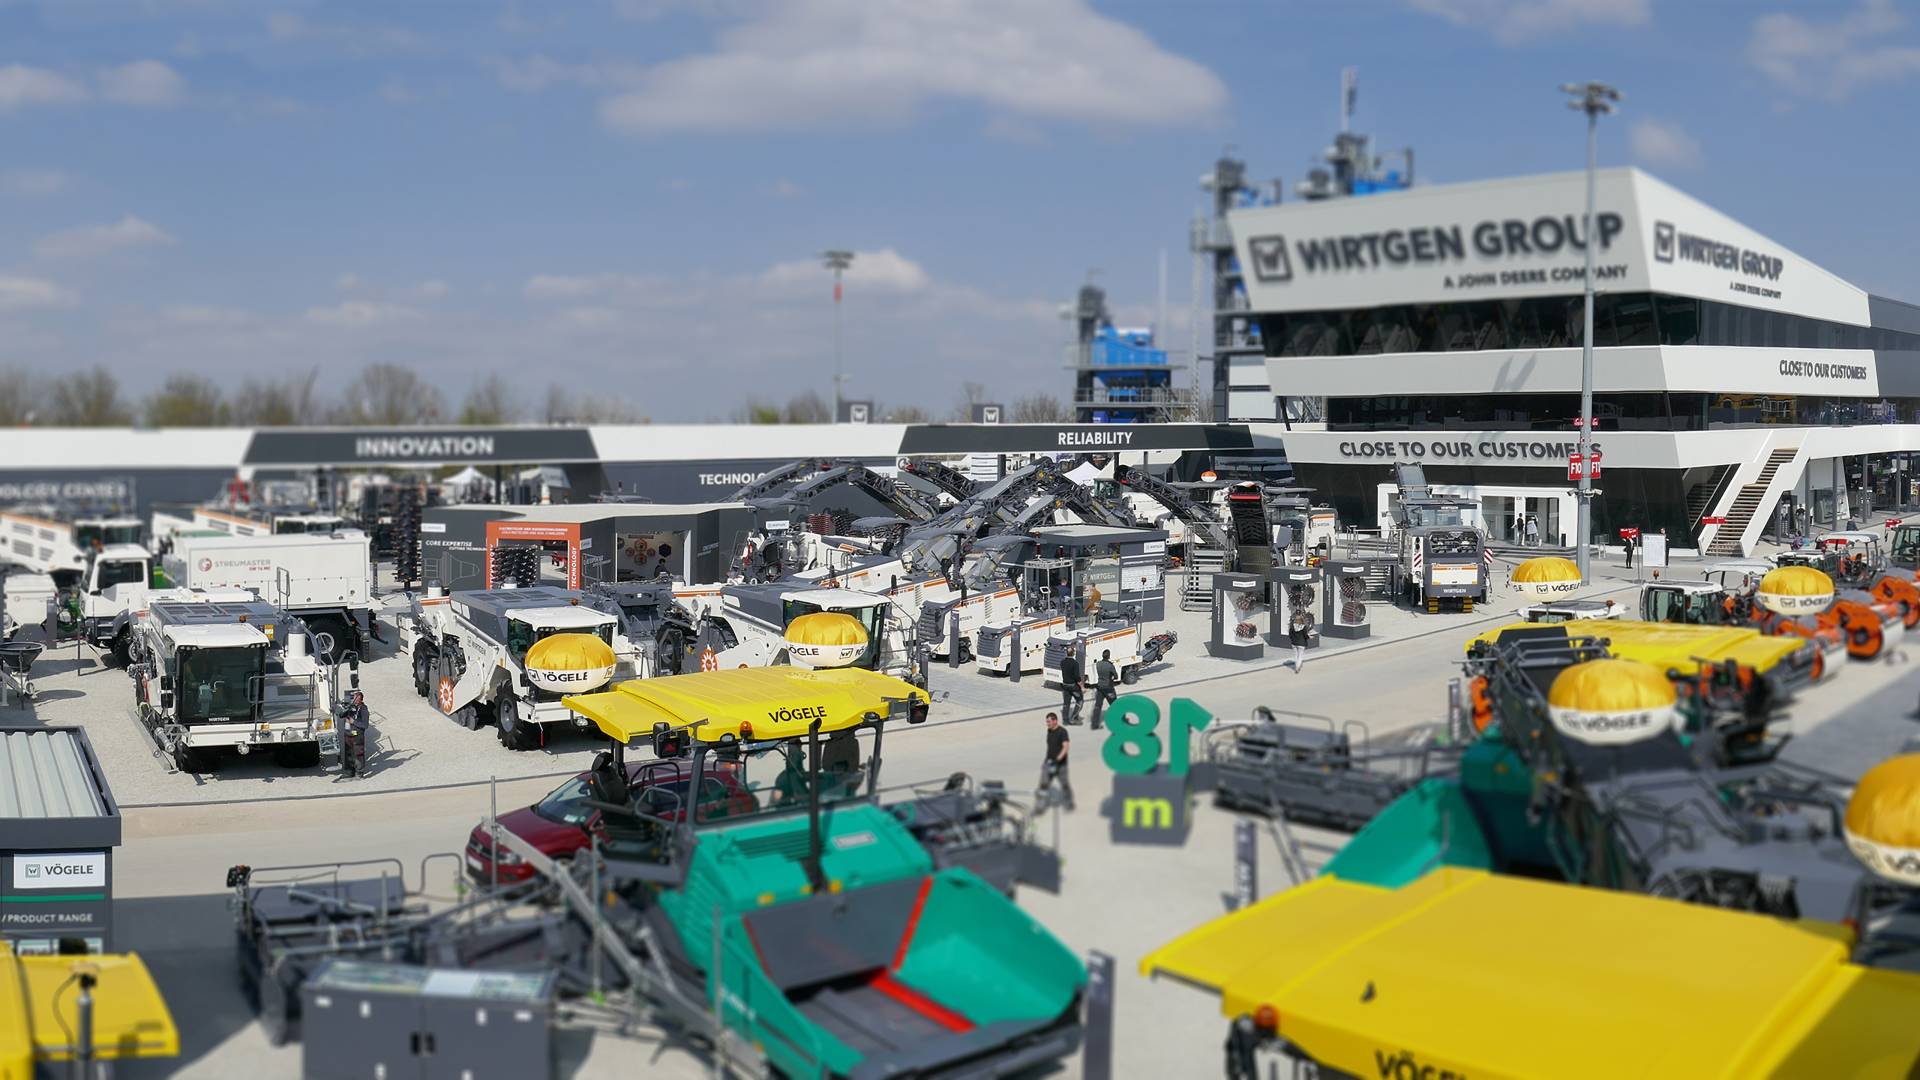 View over the exhibition grounds at bauma 2019 with WIRTGEN machines